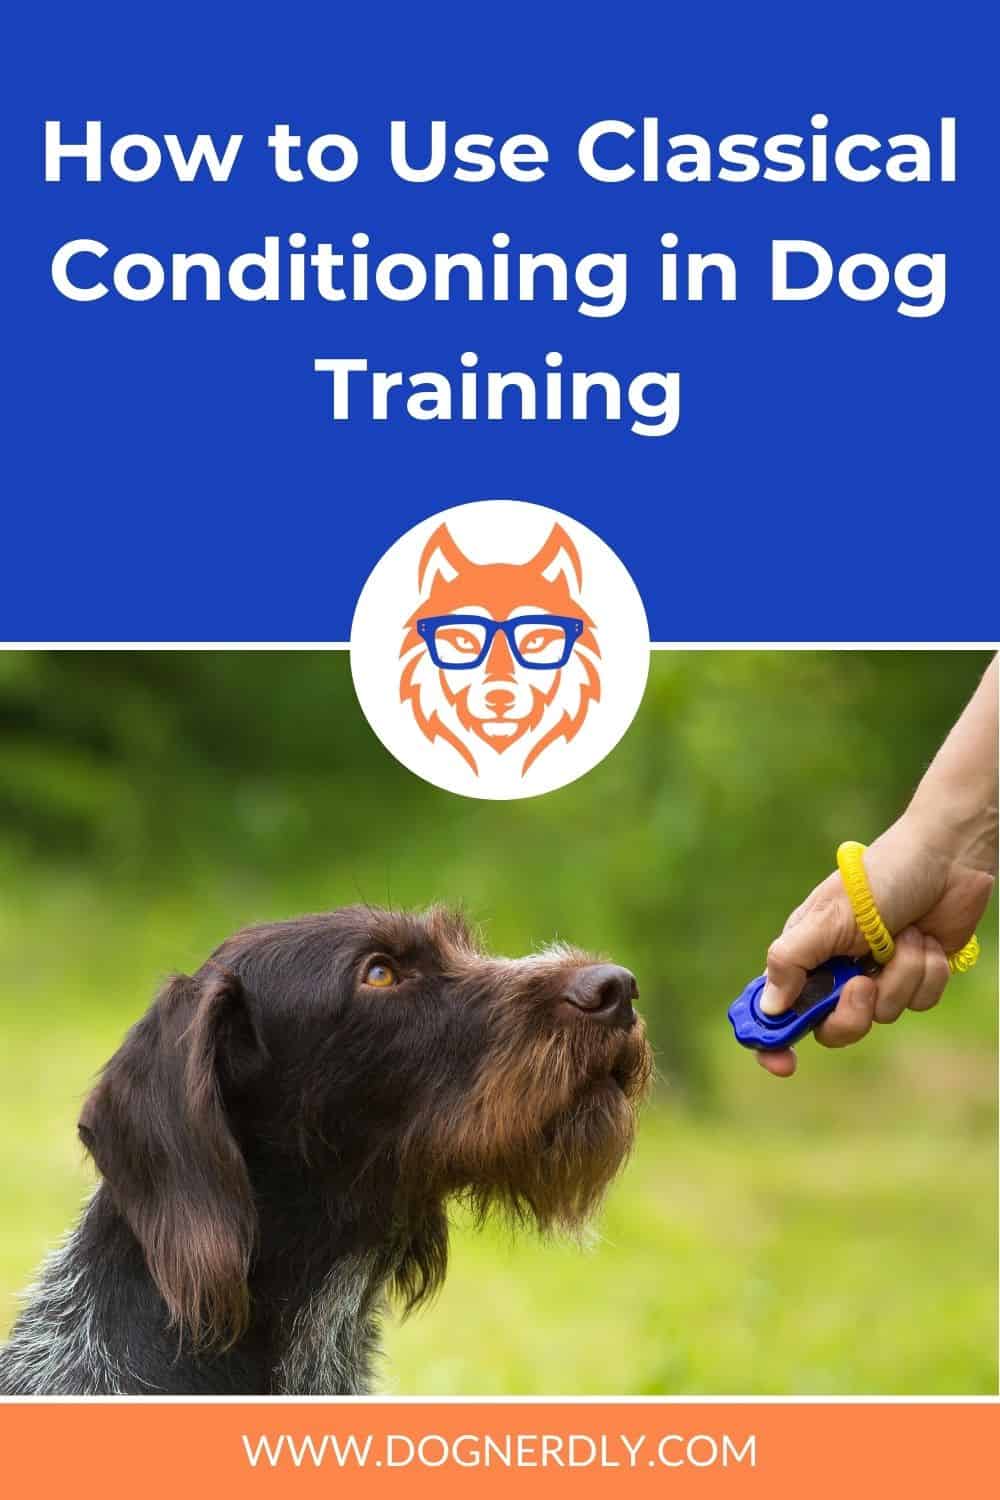 How to Use Classical Conditioning in Dog Training